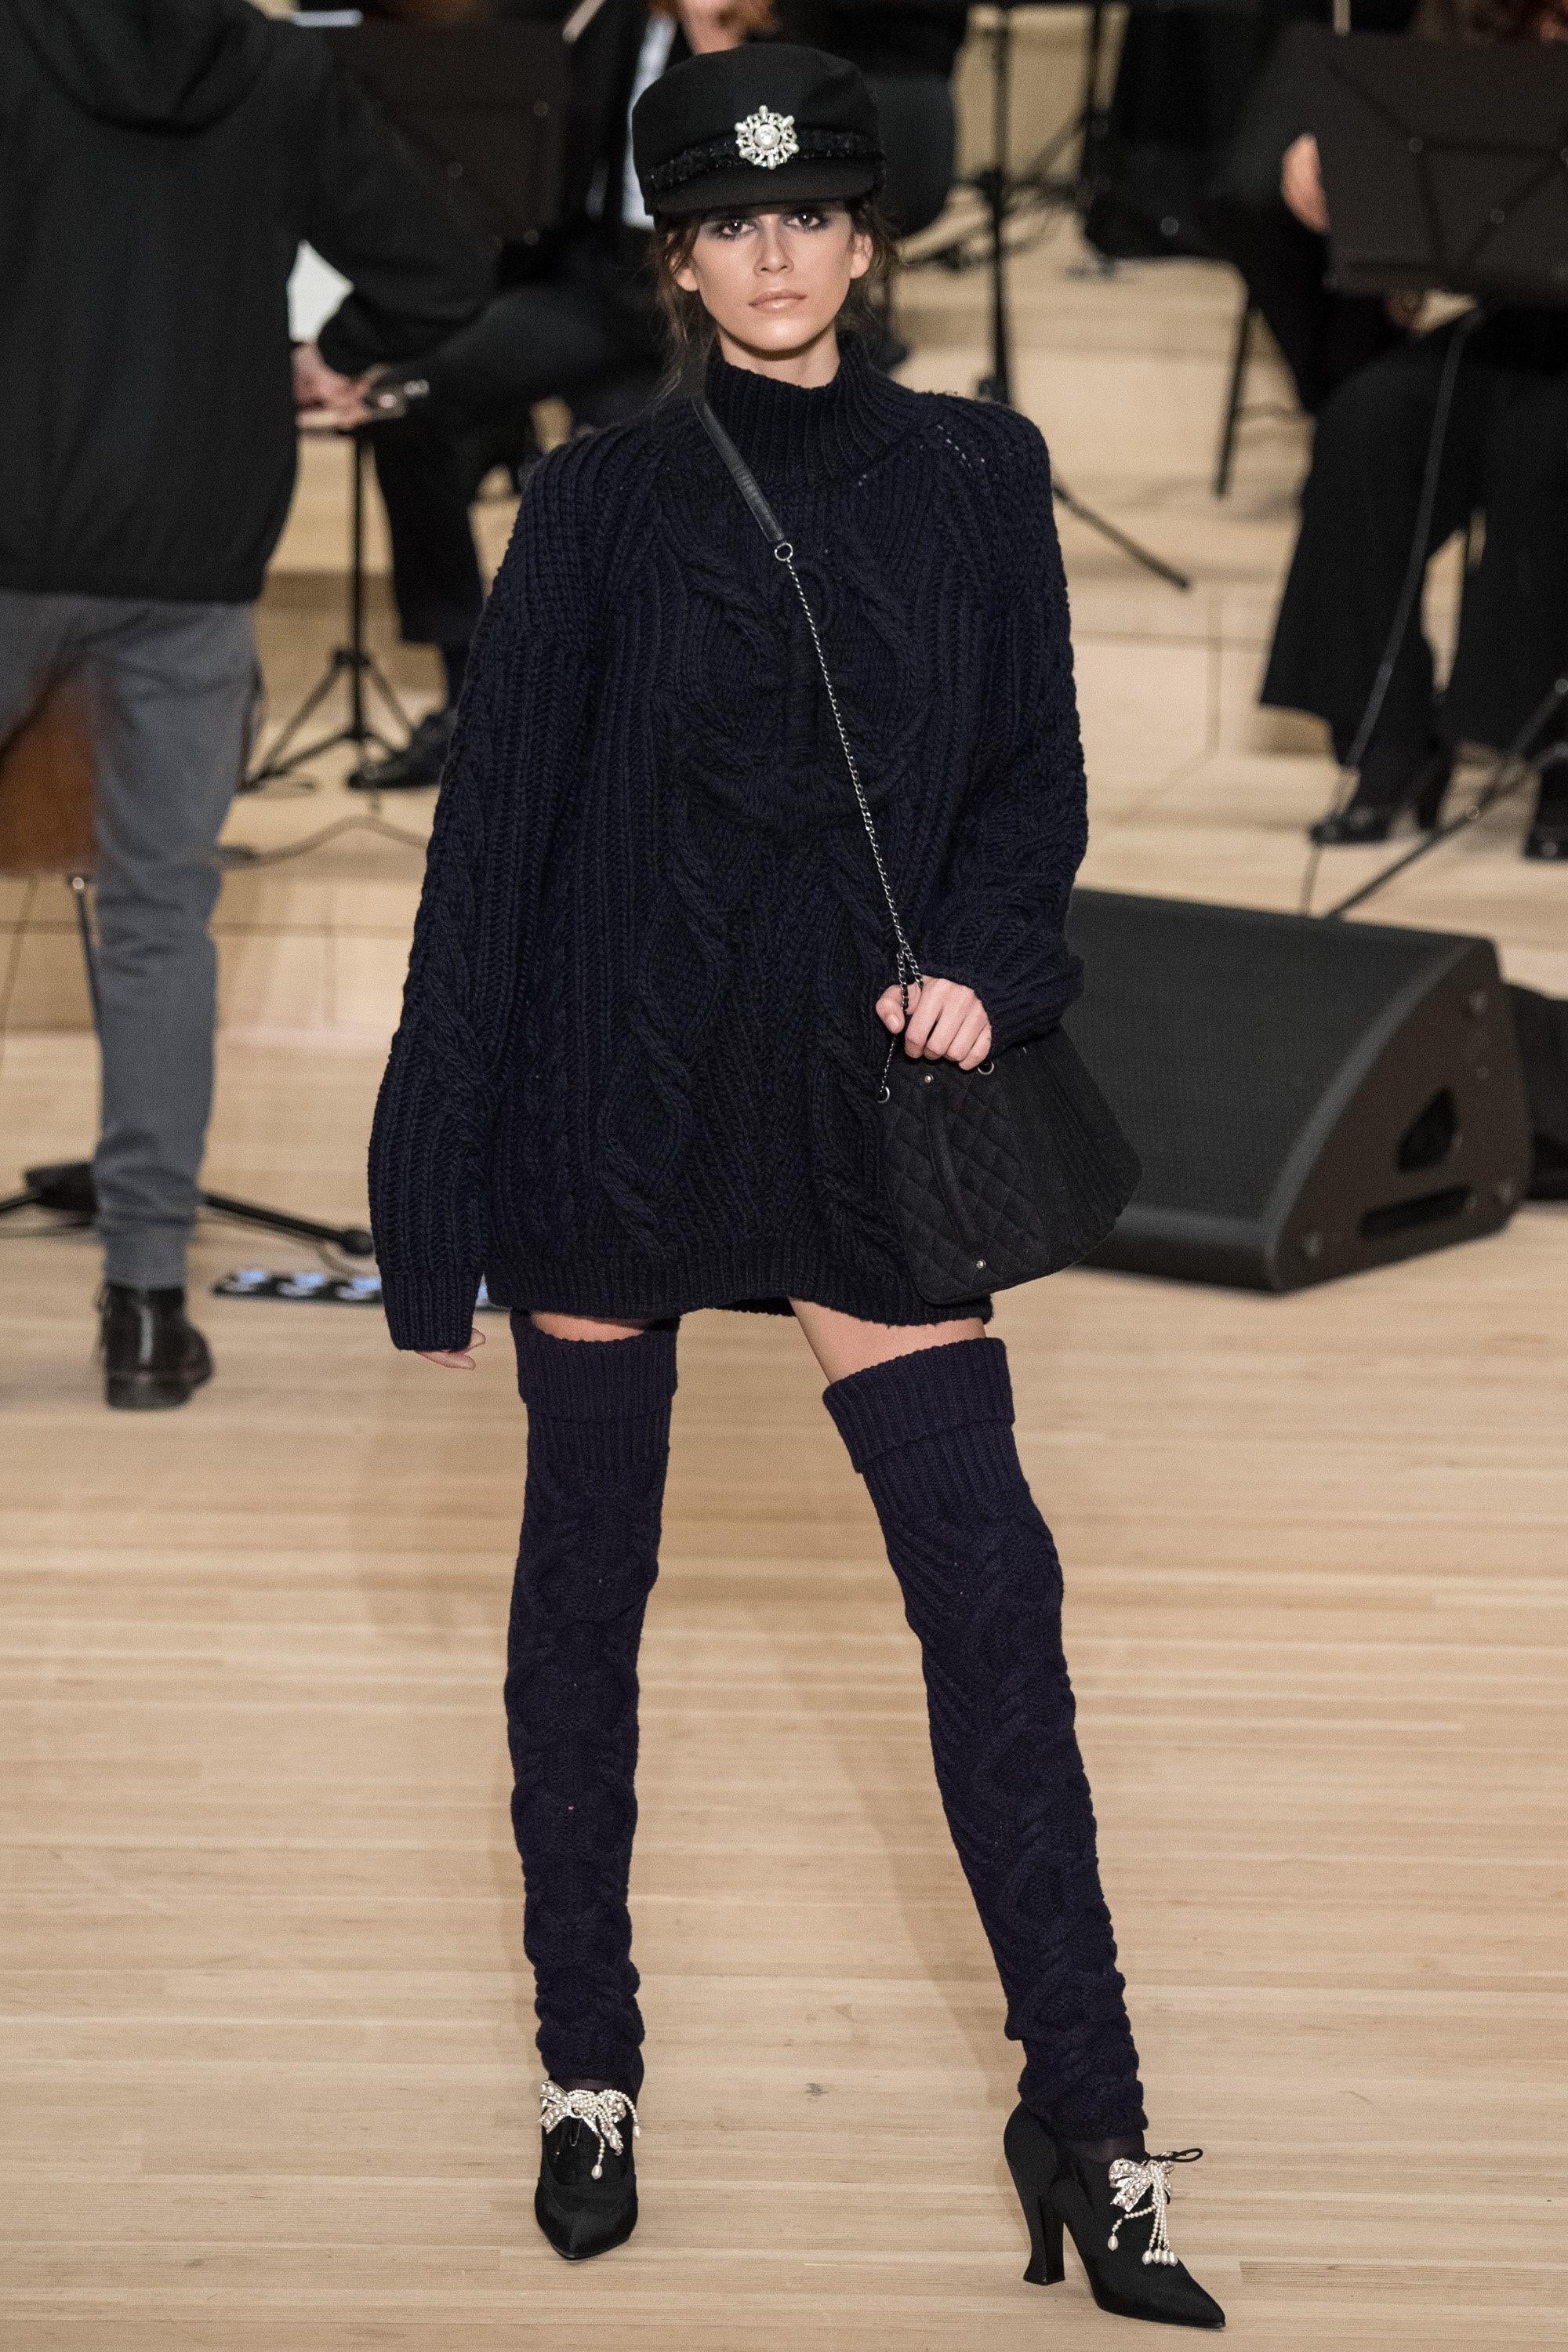 Runway Chanel navy chunky knit dress with anchor from Paris / HAMBURG Collection, 2018 Metiers d'Art
- As seen on Kaia Gerber on Catwalk!
- CC logo charm at side
Size mark 38 FR. Kept unworn